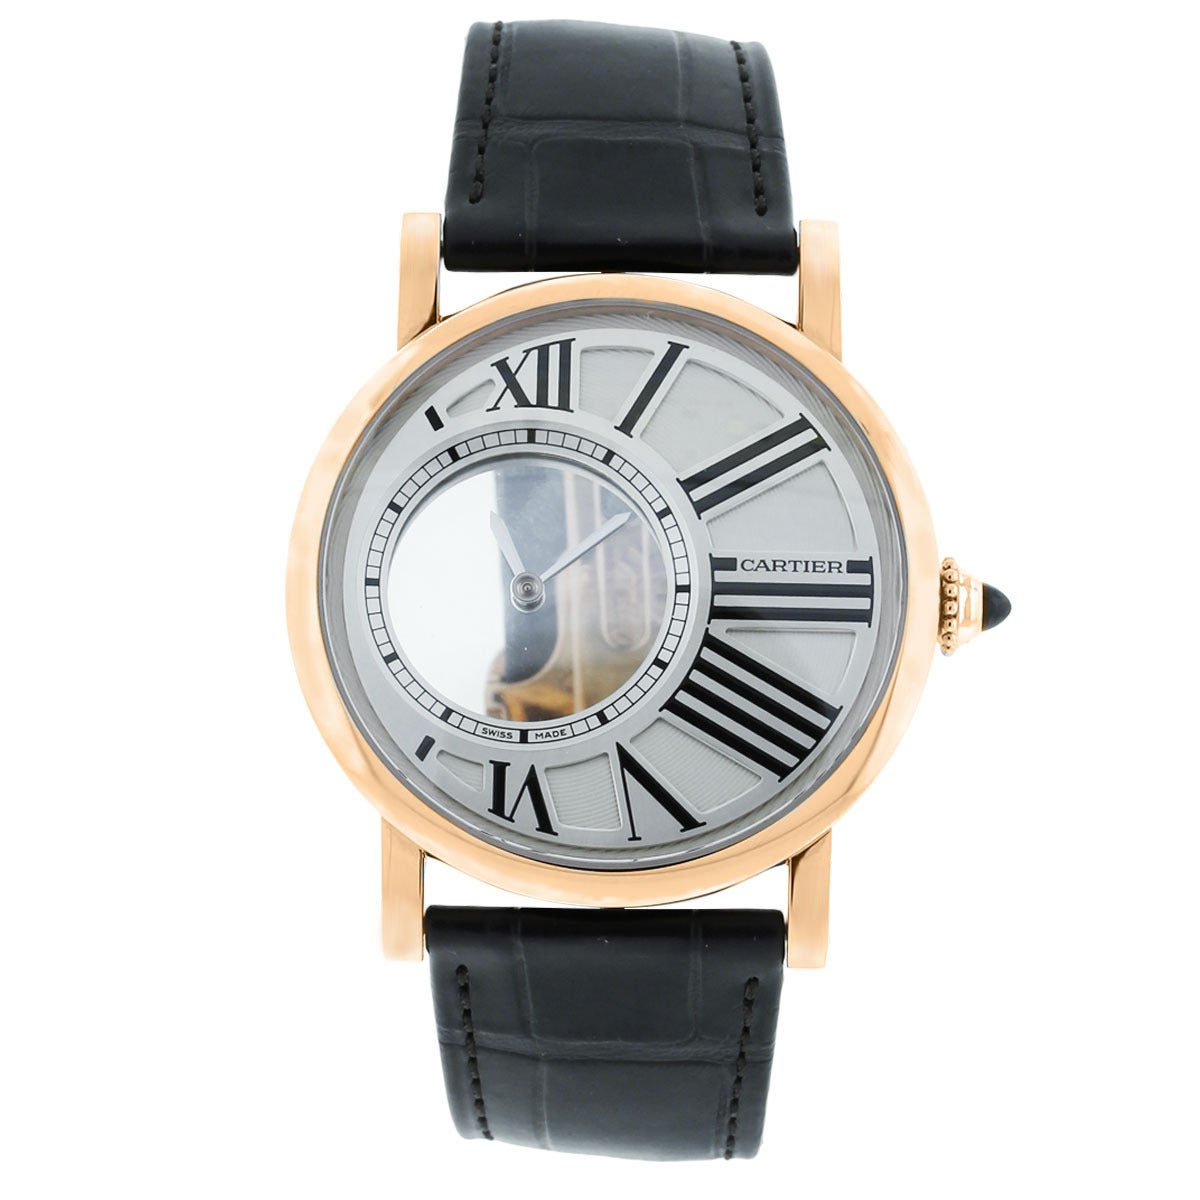 Brand: Cartier
Reference: W1556223
Case Material: 18k Rose Gold
Movement: Automatic (with 48 hour power reserve) 
Case Measurement: 42mm
Dial: White Mystery Dial 
Crystal: Scratch Resistant Sapphire
Clasp: 18k Rose Gold adjustable buckle